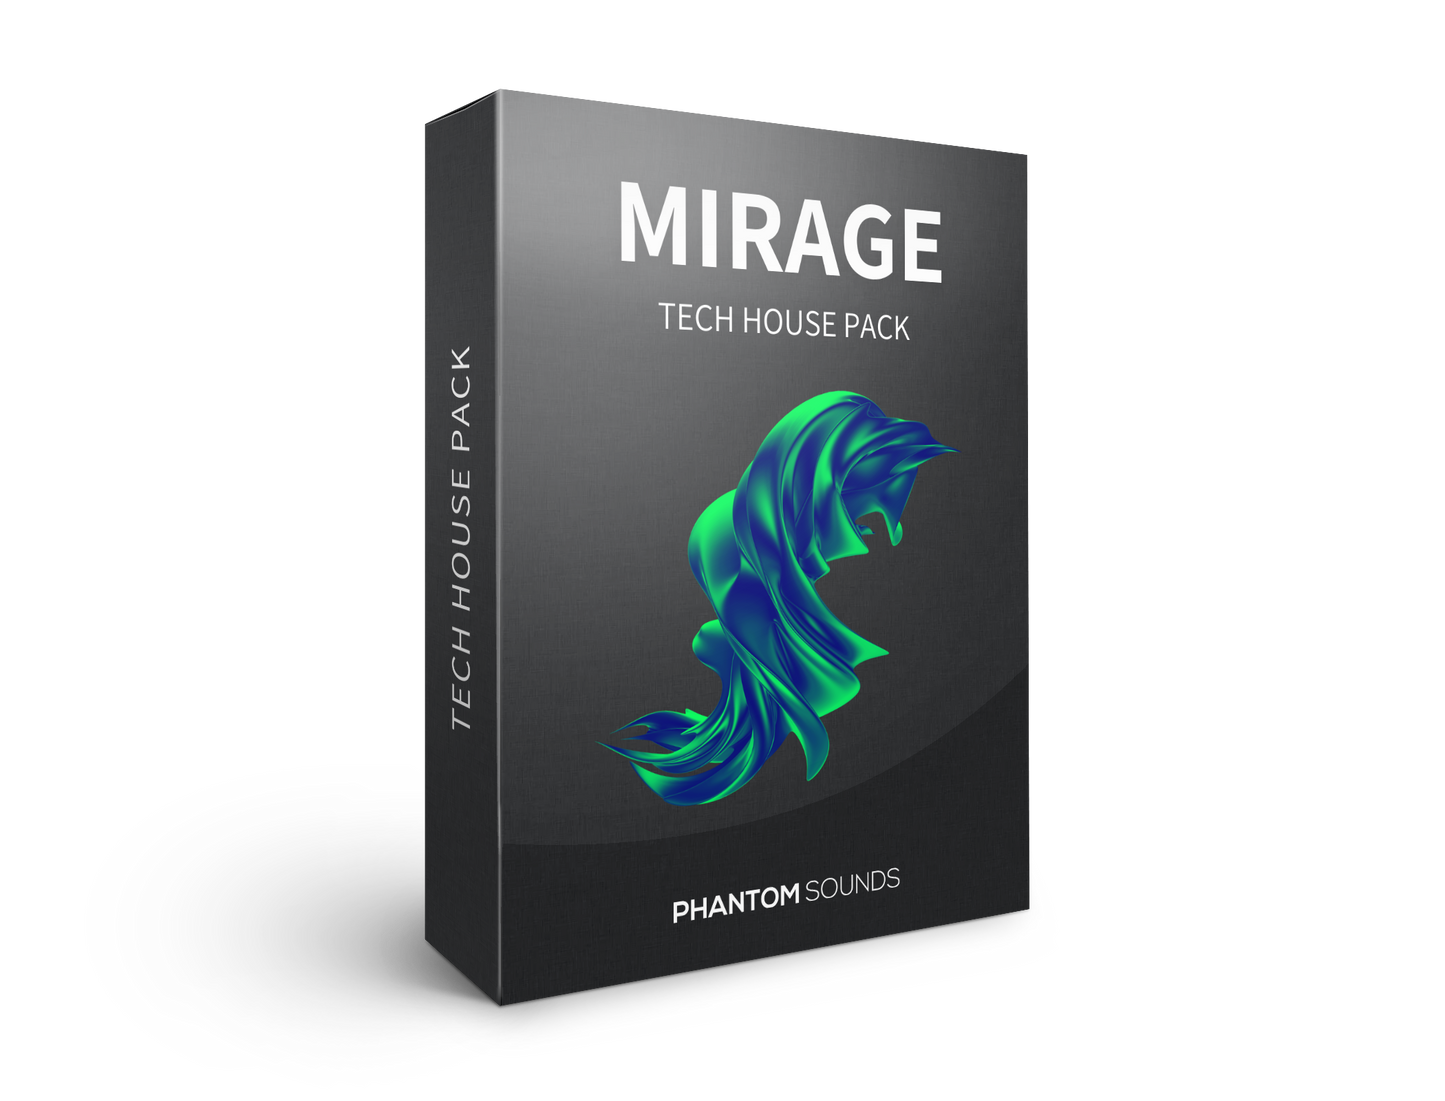 Mirage - Tech House Pack